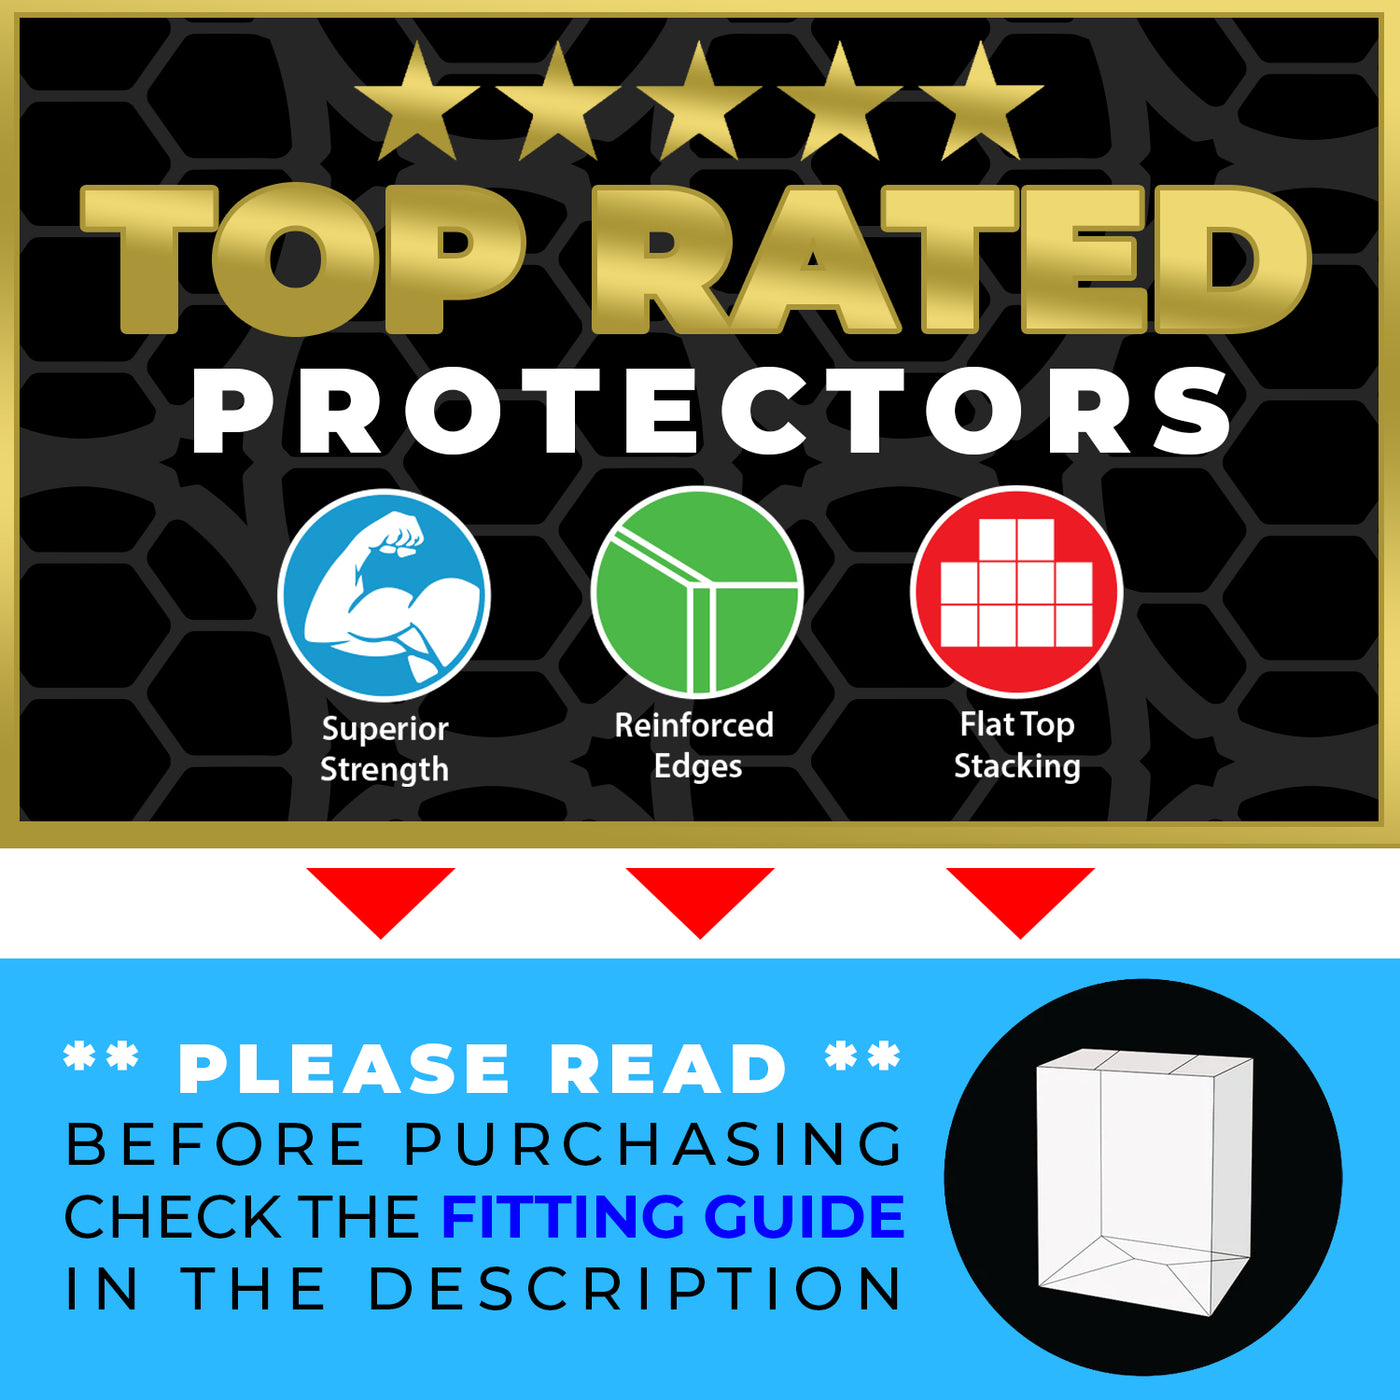 pop trading cards panini prizm best funko pop protectors thick strong uv scratch flat top stack vinyl display geek plastic shield vaulted eco armor fits collect protect display case kollector protector